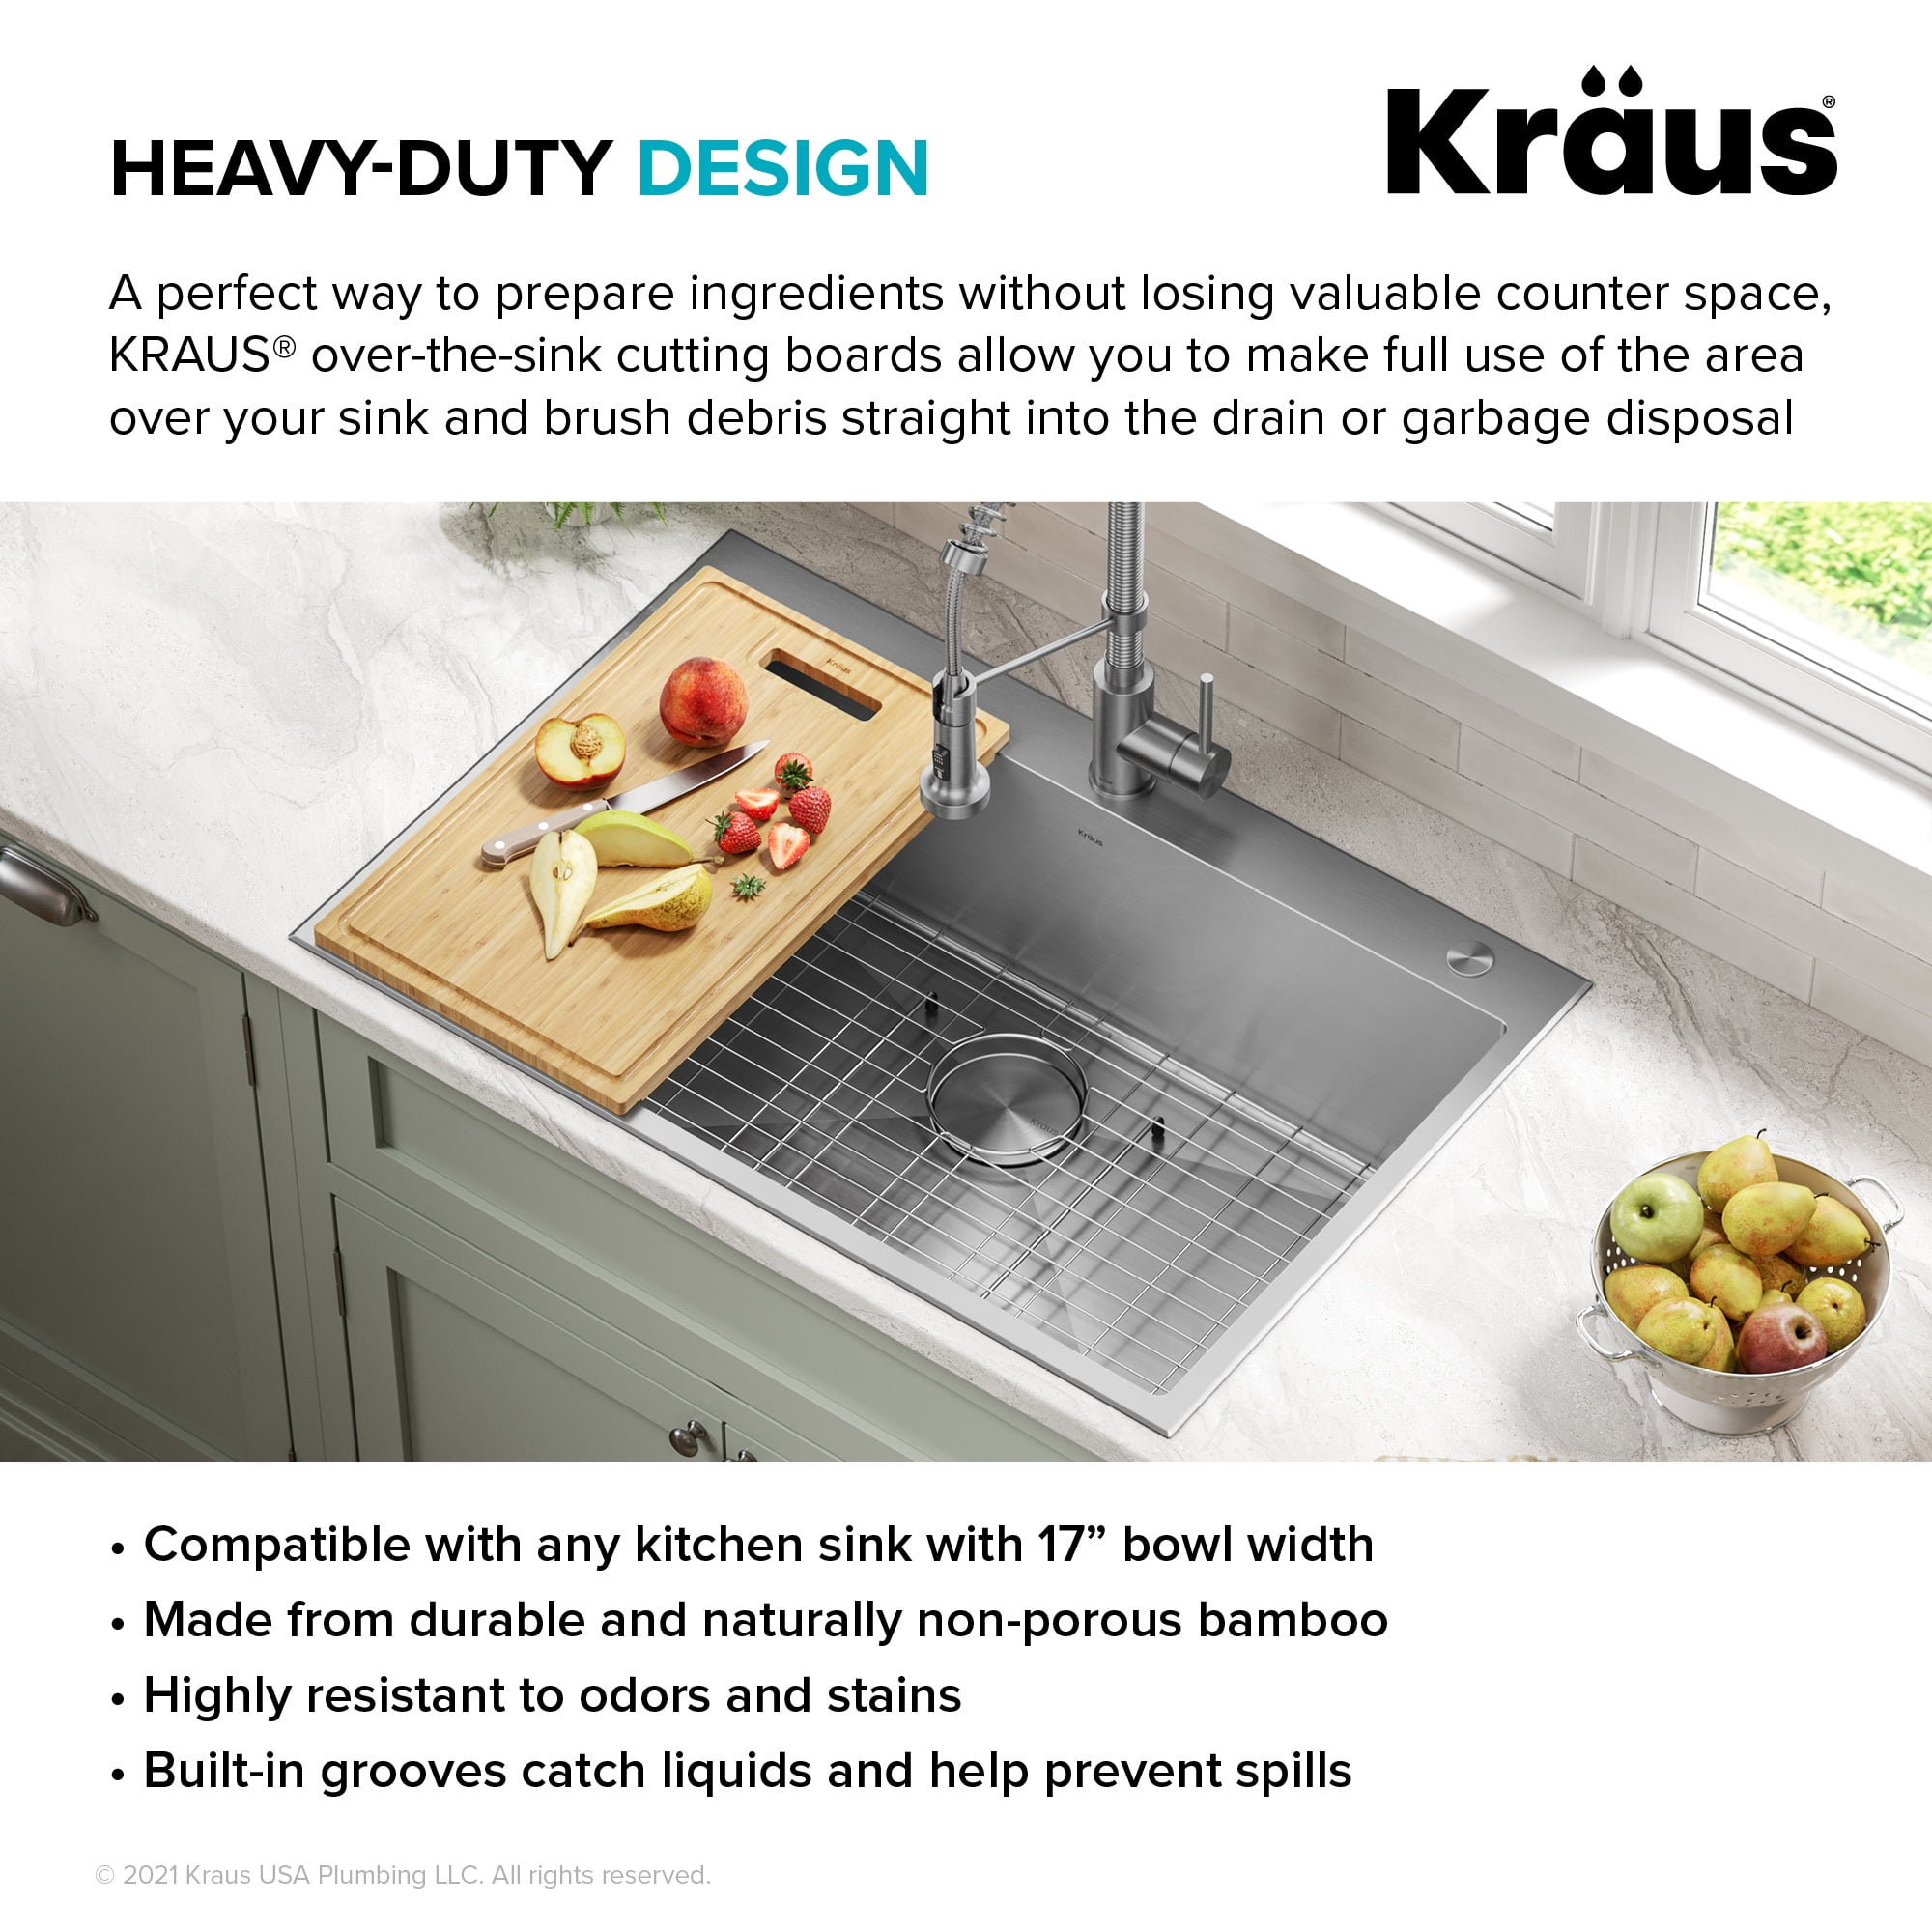 KRAUS Rectangular Solid Bamboo Cutting Board with Mobile Device